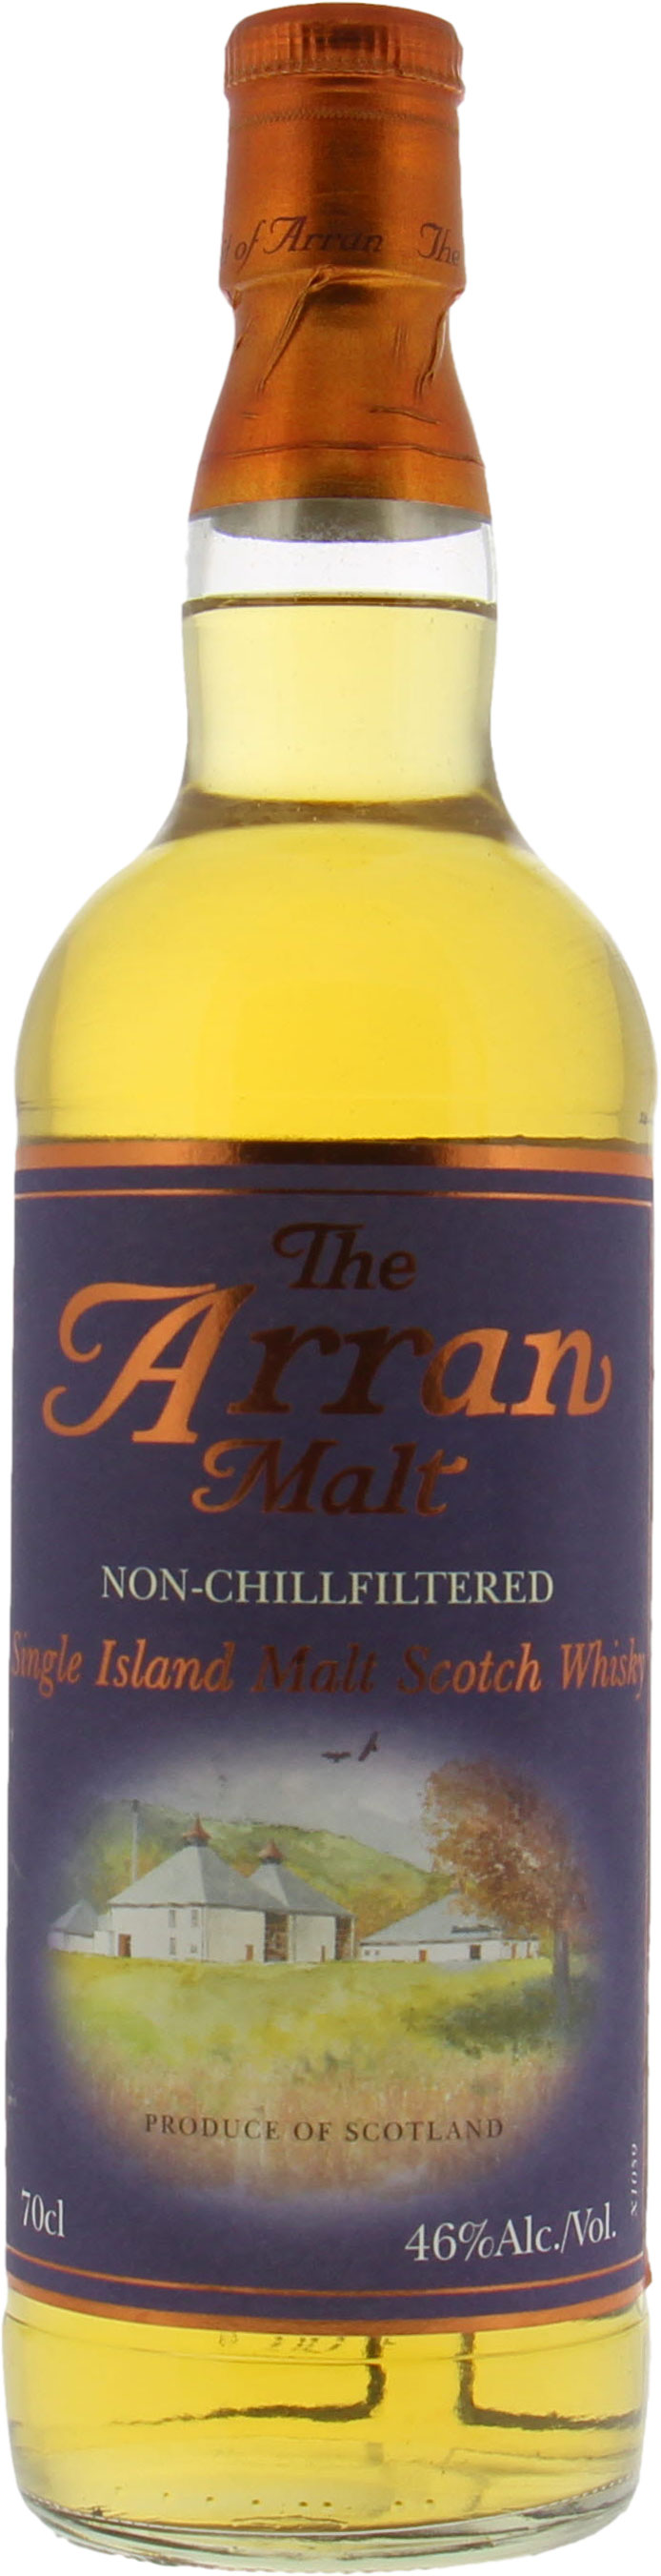 Arran - 7 years Old Non-Chillfiltered 46% NV